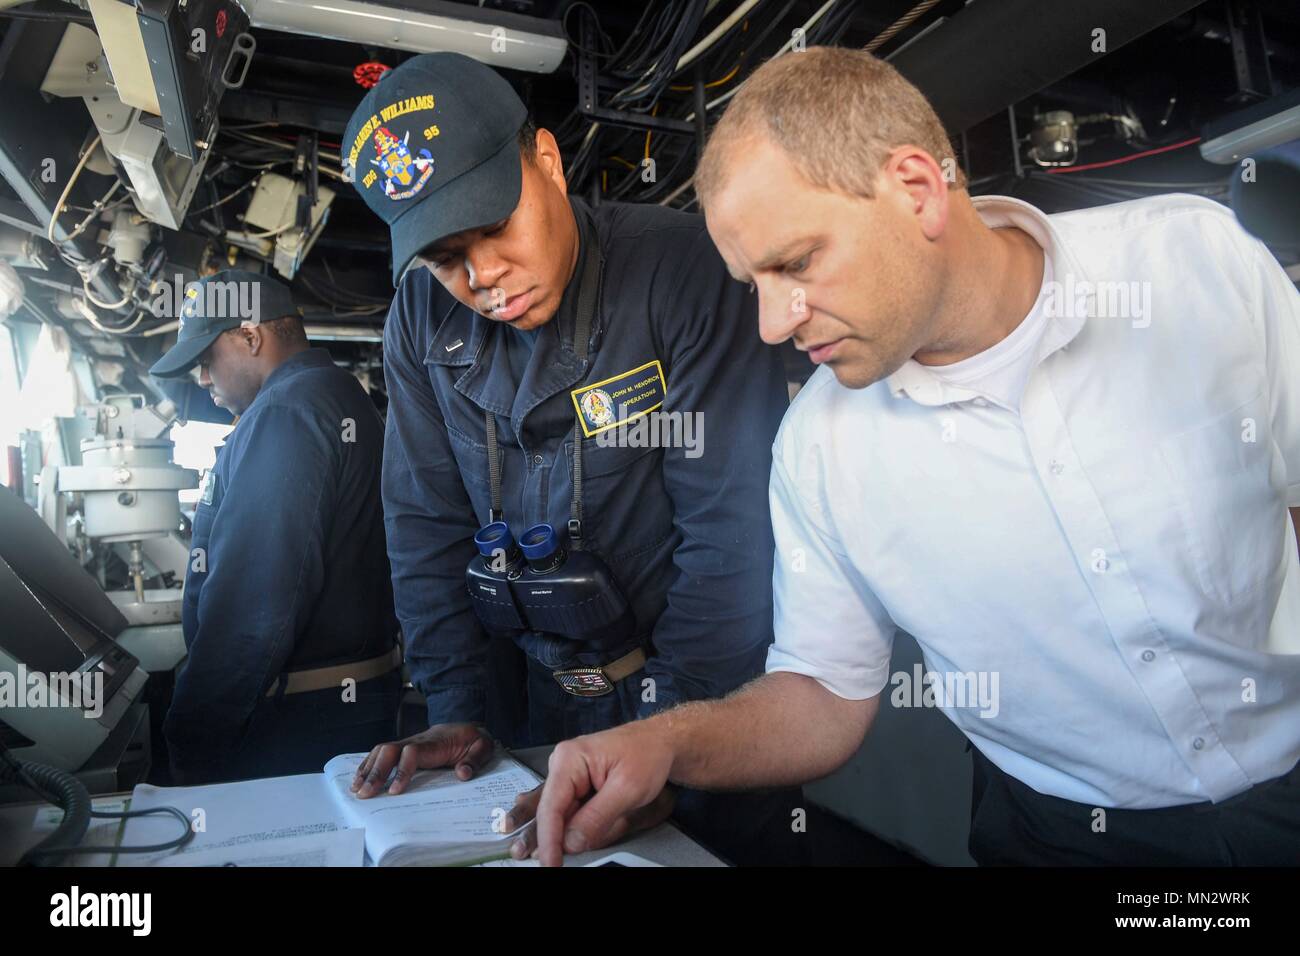 170822-N-GX781-233 SKAGERRAK STRAIT (Aug. 22, 2017) - Lt. j.g. John Hendricks, from Tampa, coordinates the track of the Arleigh Burke-class guided-missile destroyer USS James E. Williams (DDG 95) with a Danish pilot as the ship transits the Skagerrak Strait  Aug. 22, 2017.  James E. Williams, home-ported in Norfolk, is on a routine deployment to the U.S. 6th Fleet area of operations in support of U.S. national security interests in Europe. (U.S. Navy photo by Mass Communication Specialist 3rd Class Colbey Livingston/ Released) Stock Photo